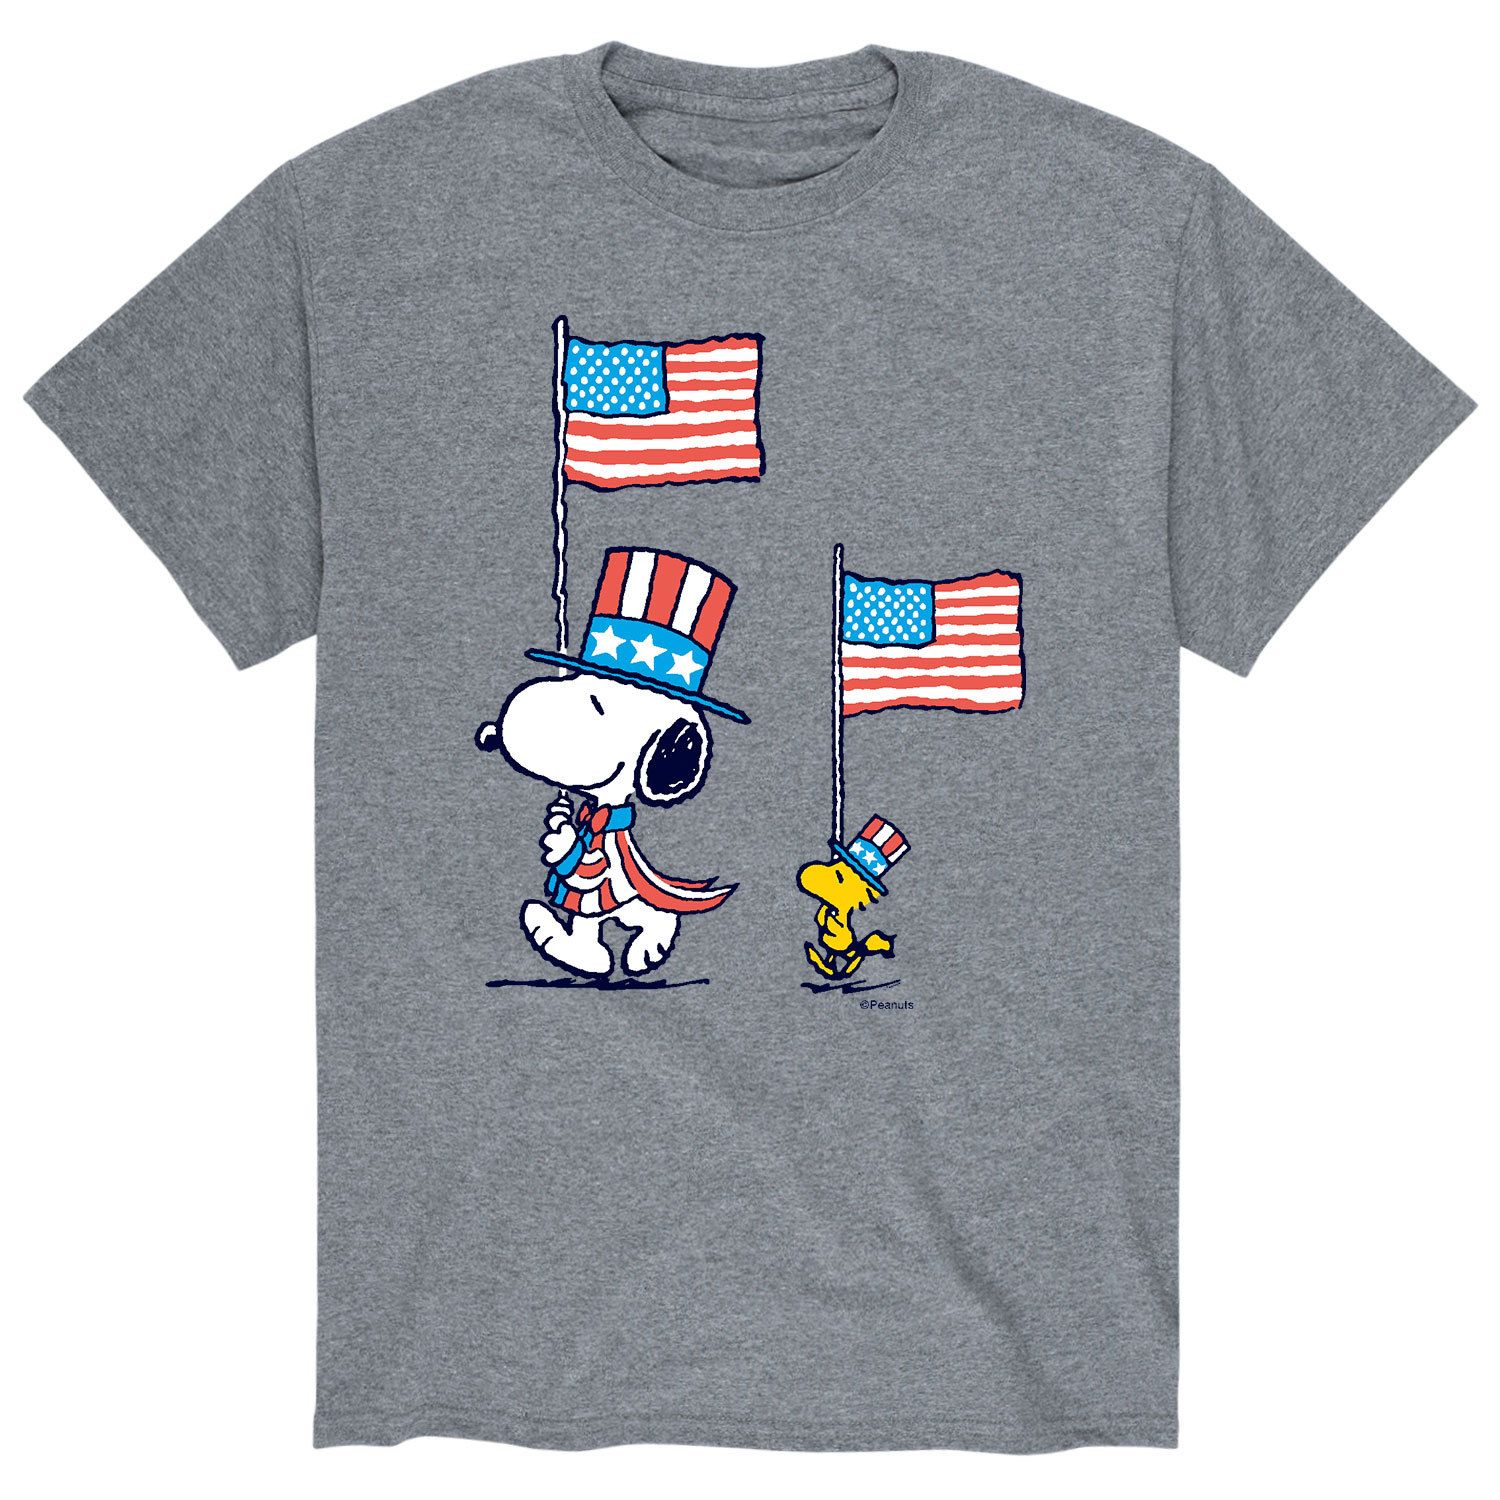 Мужская футболка Peanuts Snoopy Woodstock March Licensed Character мужская майка peanuts snoopy woodstock march licensed character